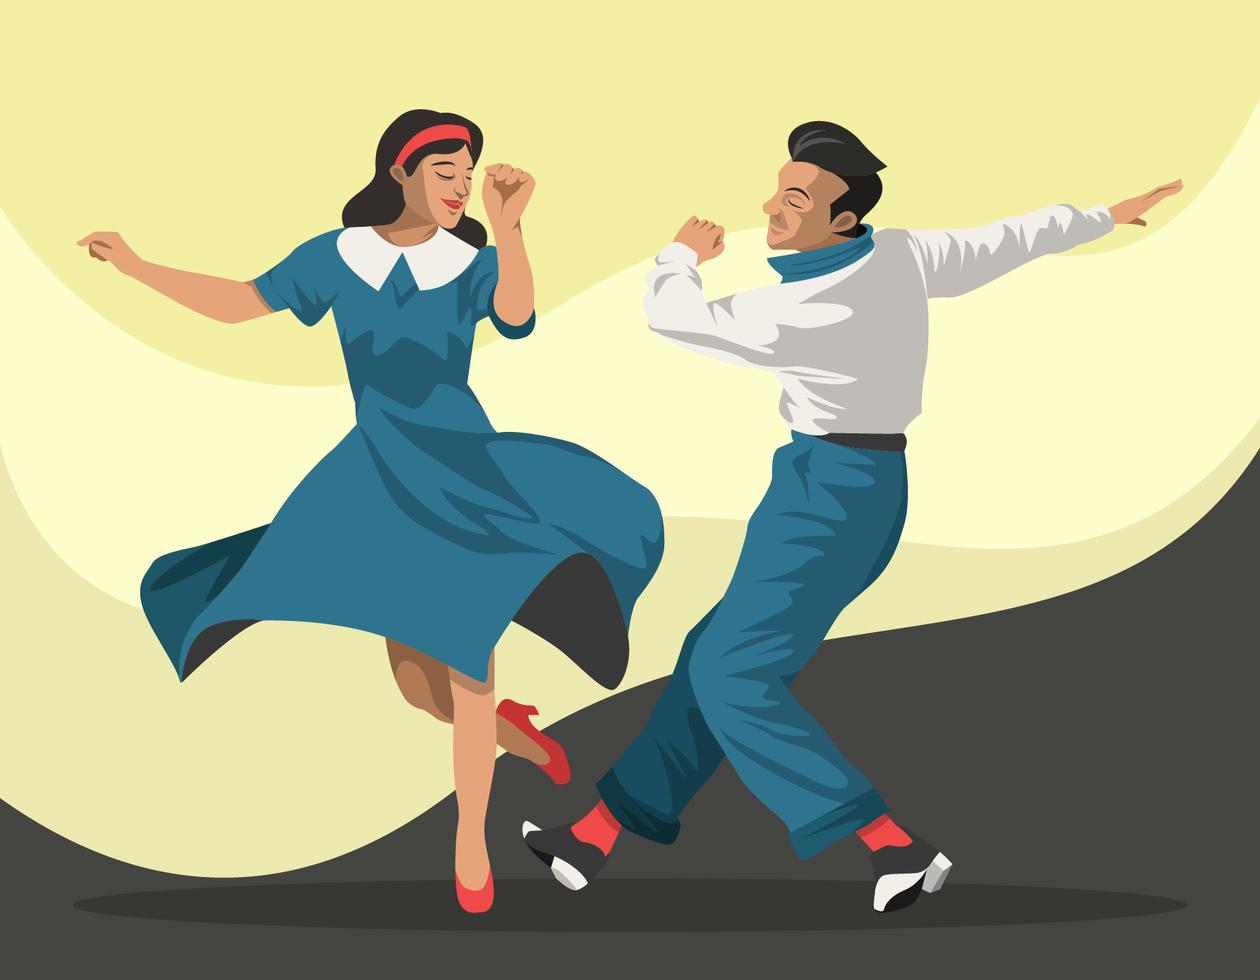 Couple Dressed in 1940s Fashion Dancing a Tap Dance, Vector Illustration.